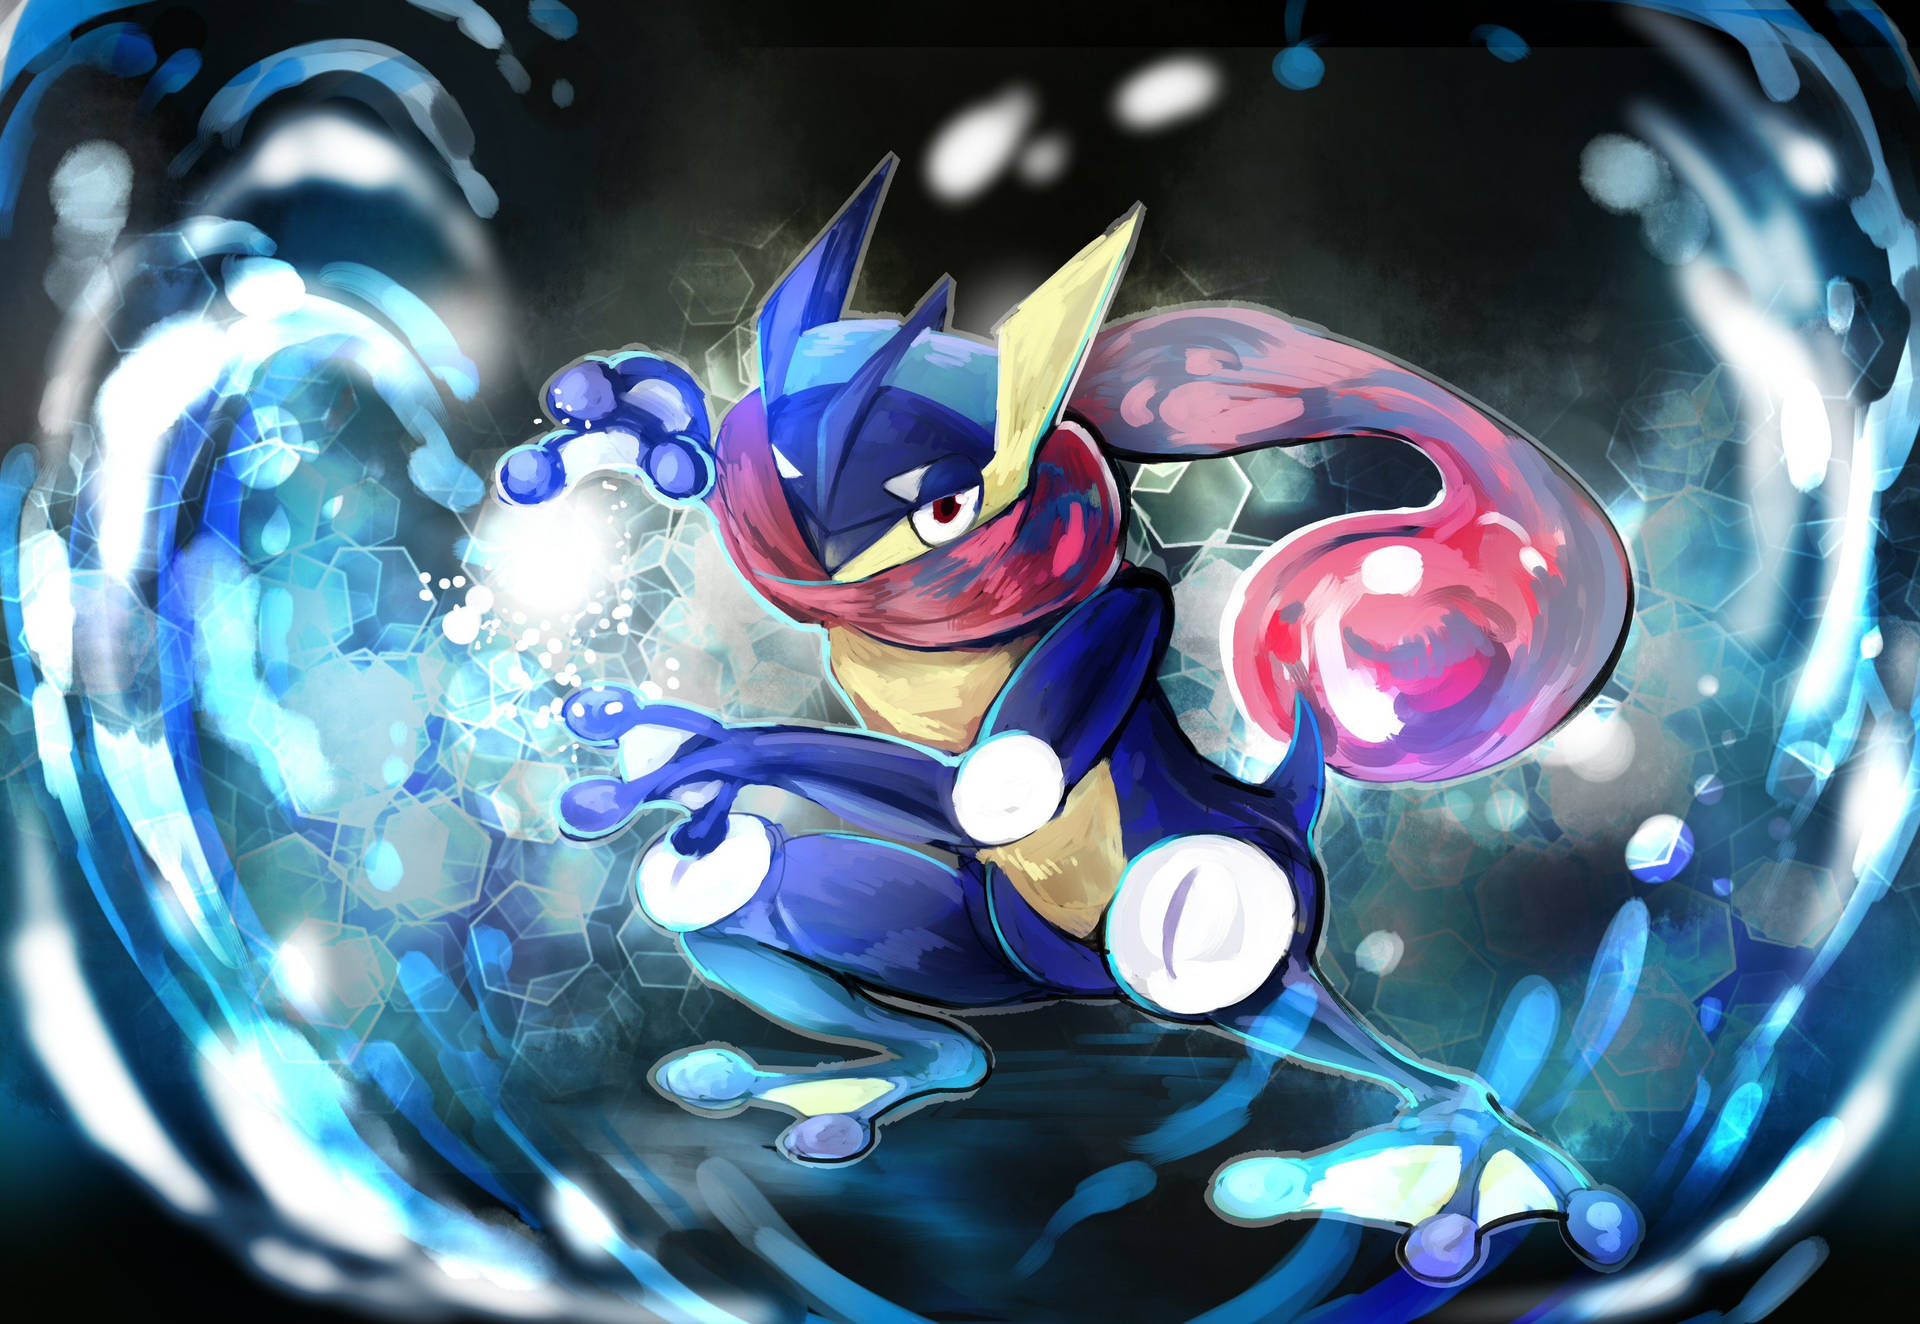 A swift Greninja leaps from the waters. Wallpaper